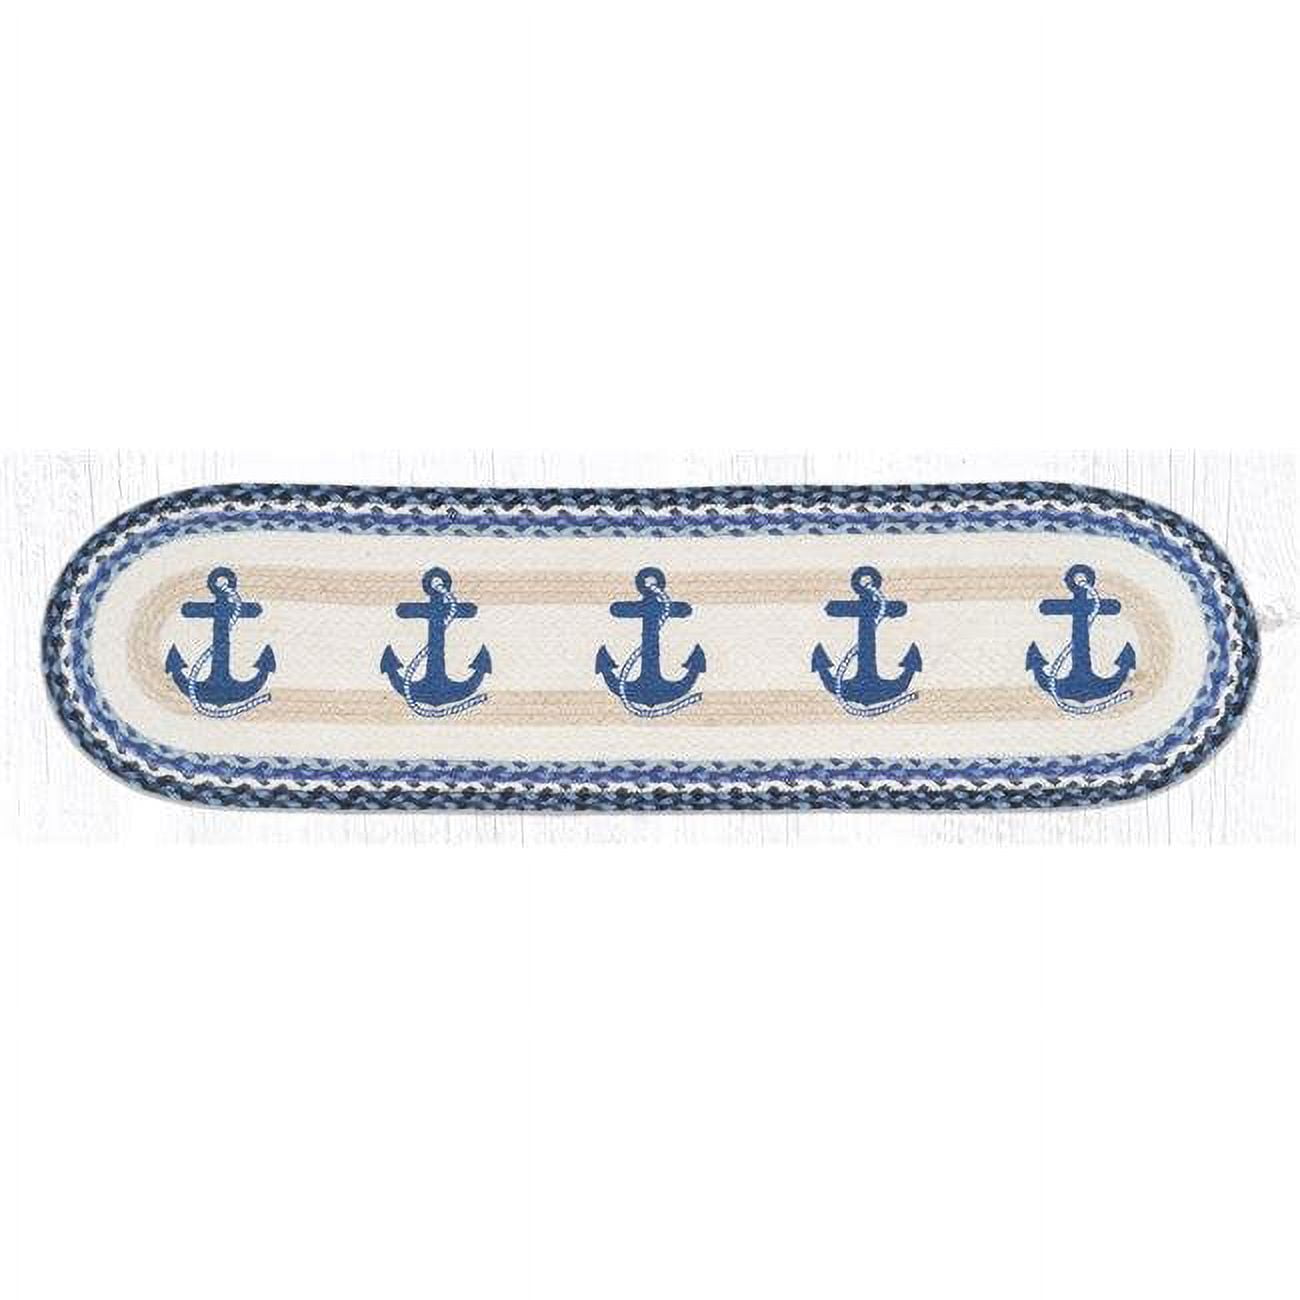 Picture of Capitol Importing 64-443NA 13 x 48 in. OP-443 Navy Anchor Oval Patch Runner